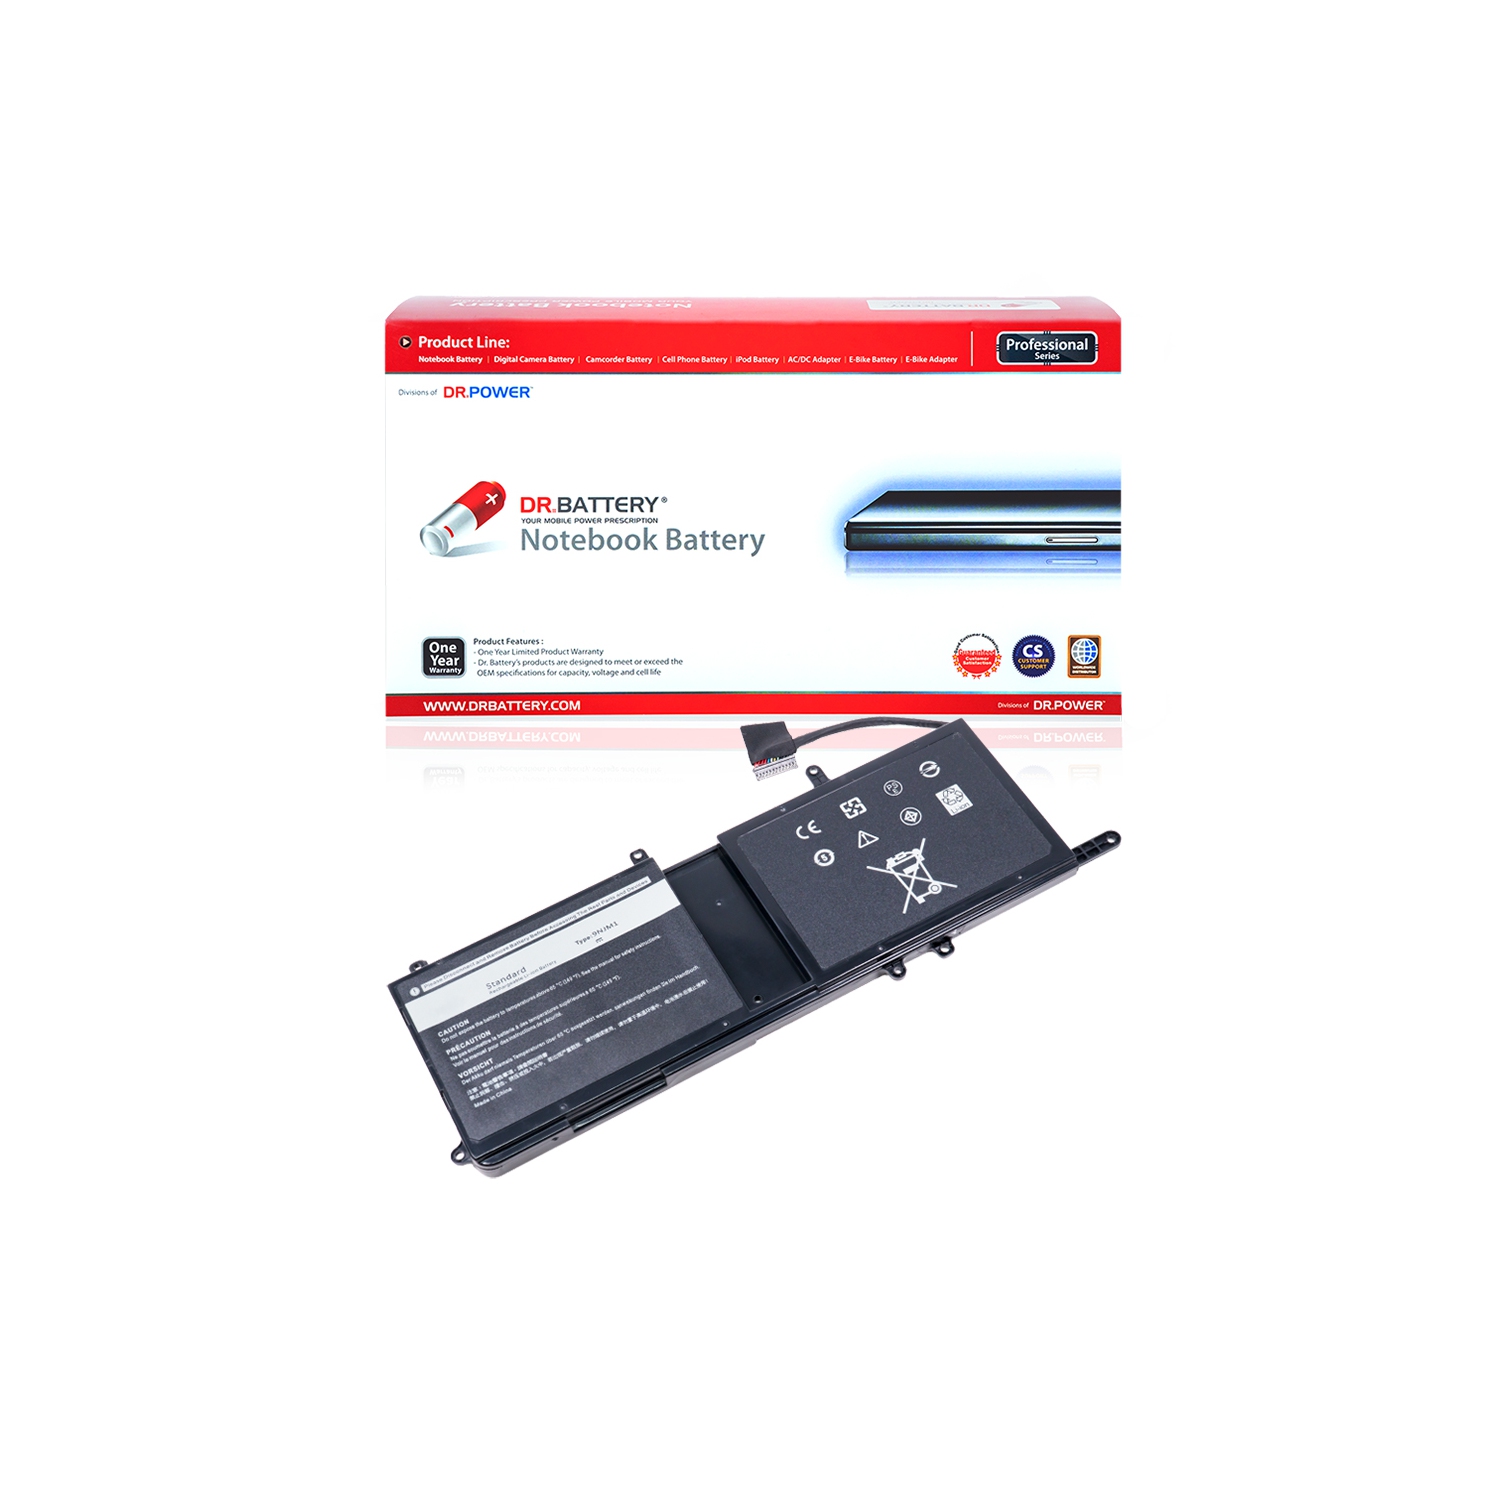 DR. BATTERY - Replacement for Dell Alienware 15 17 ALW17C-D3858S / 17 ALW17C-D3859S / 17 ALW17C-D3868S / 9NJM1 / HF250